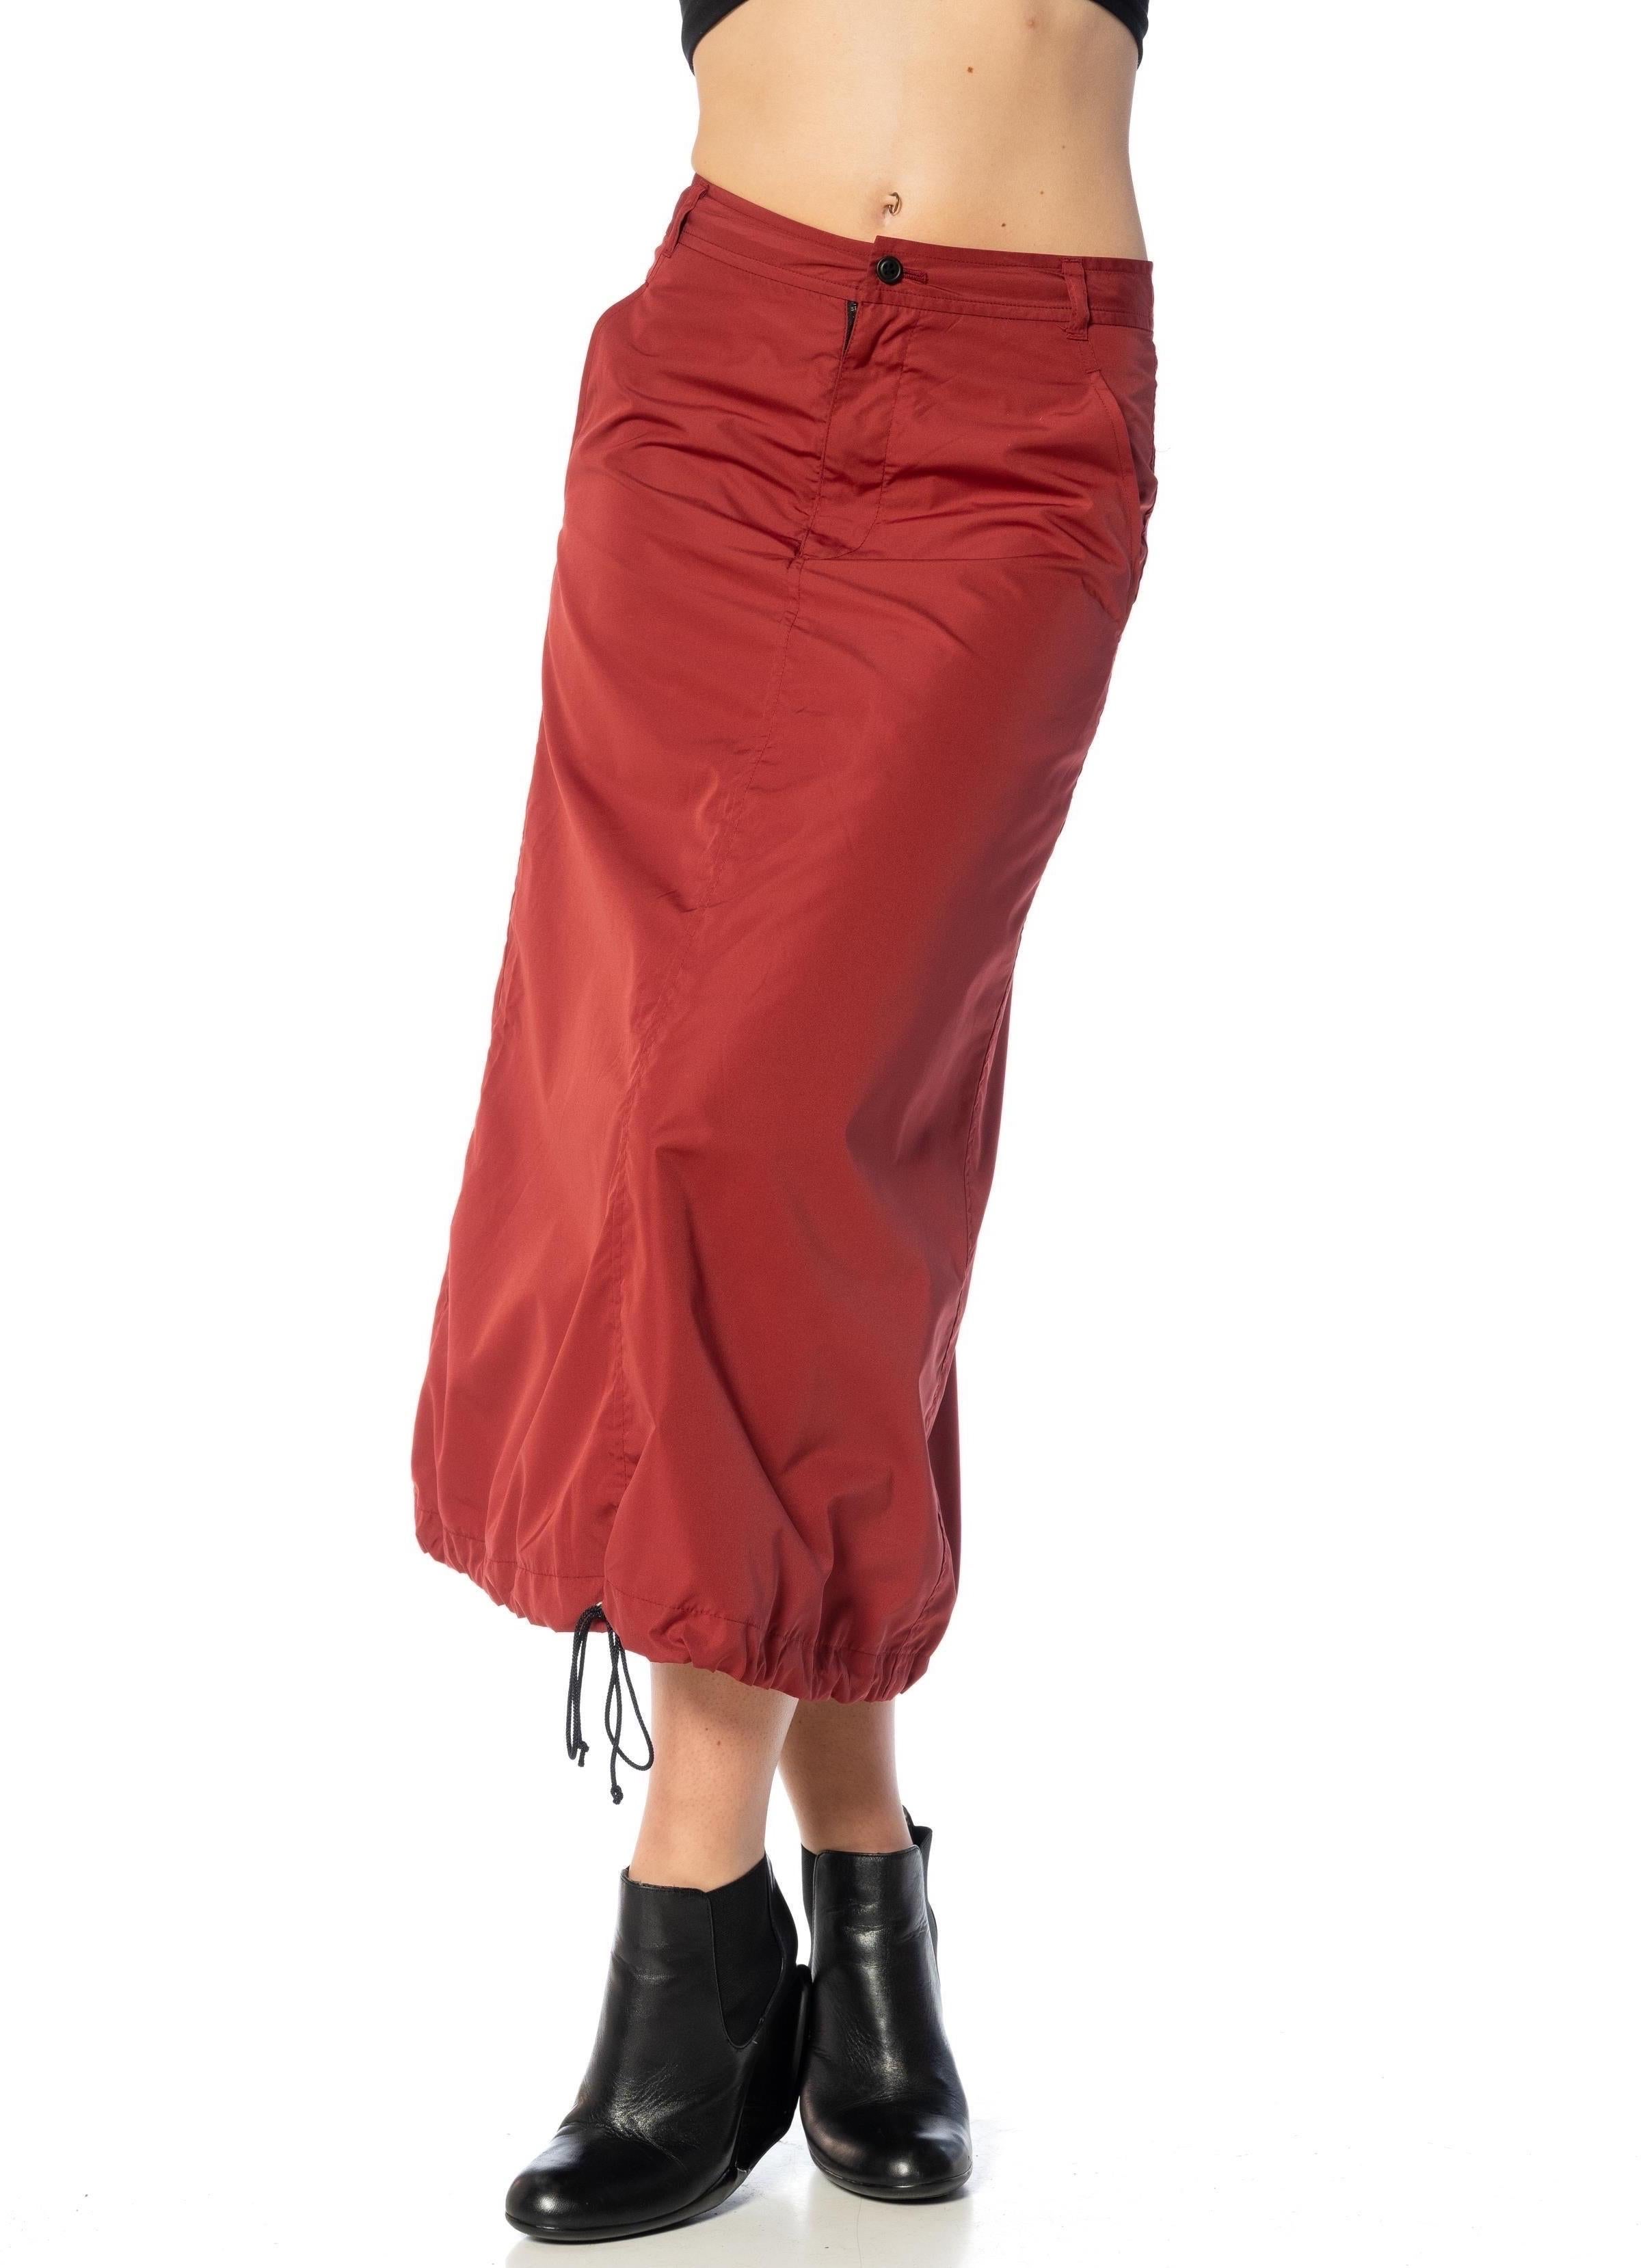 2000S COMME DES GARCONS Burgundy Polyester Parachute Skirt With Drawstring Hem  For Sale 1